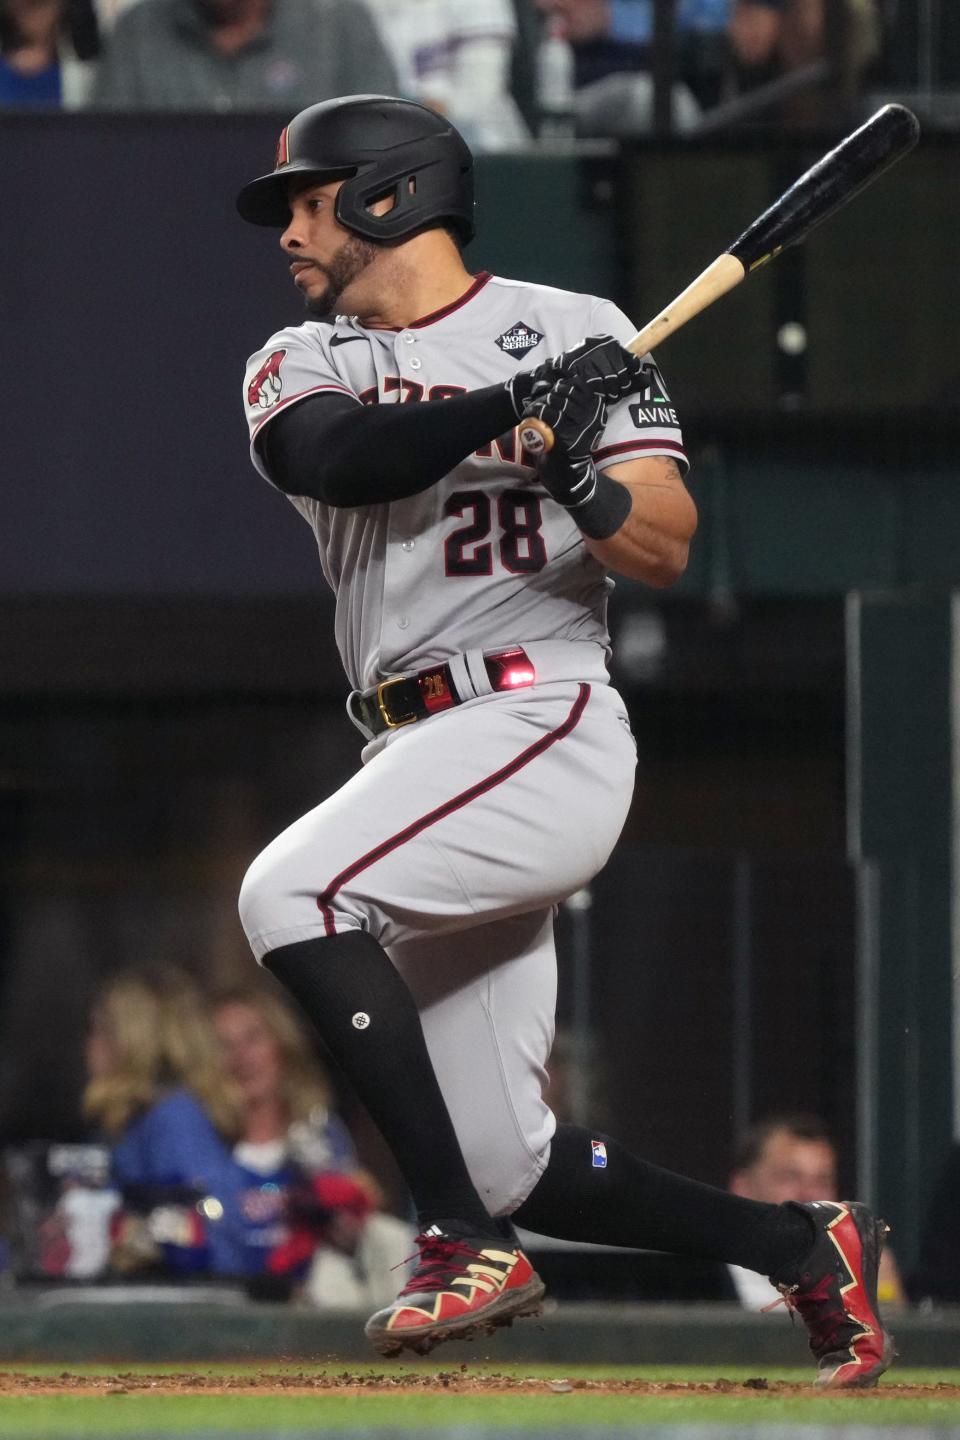 Arizona Diamondbacks designated hitter Tommy Pham (28) hits a single during the eighth inning against the Texas Rangers in game two of the 2023 World Series at Globe Life Field on Oct. 28, 2023, in Arlington, Texas.